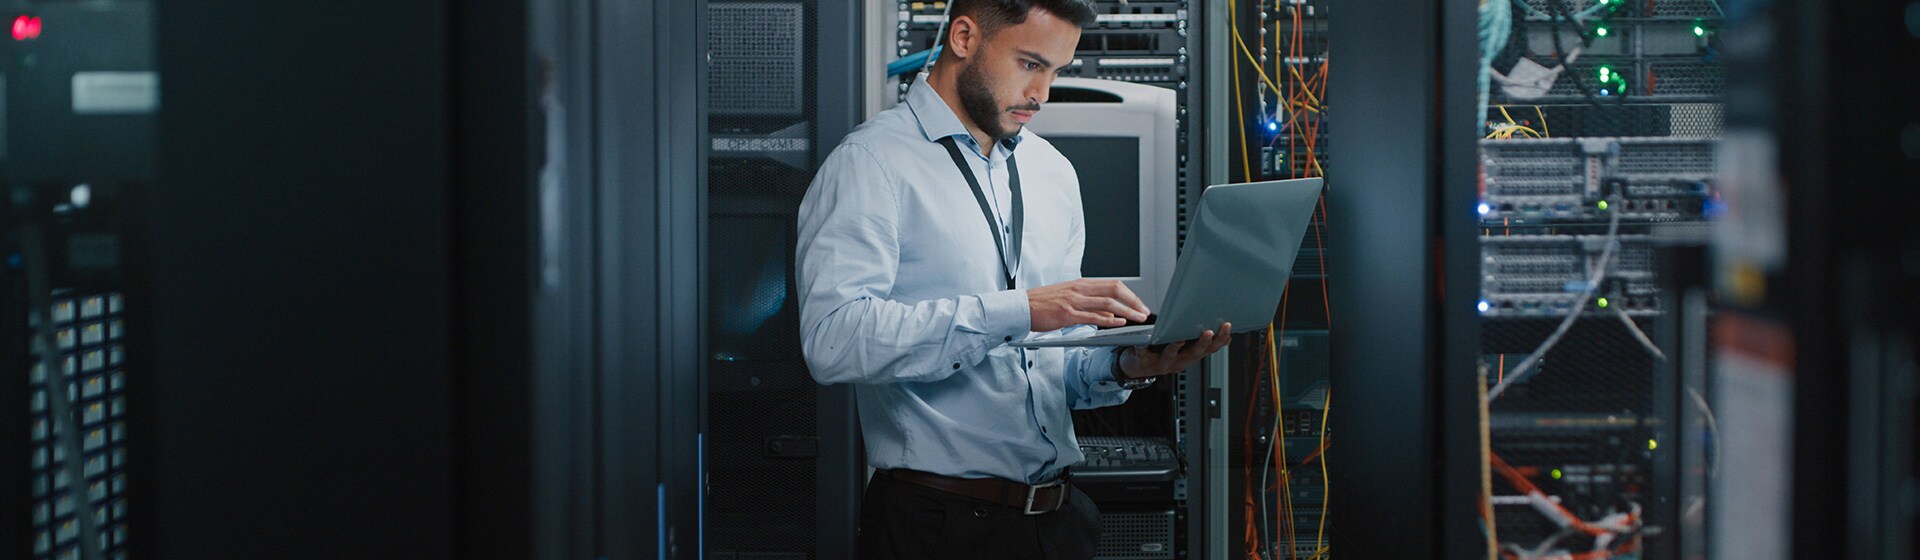 IT manager in server room using a laptop.